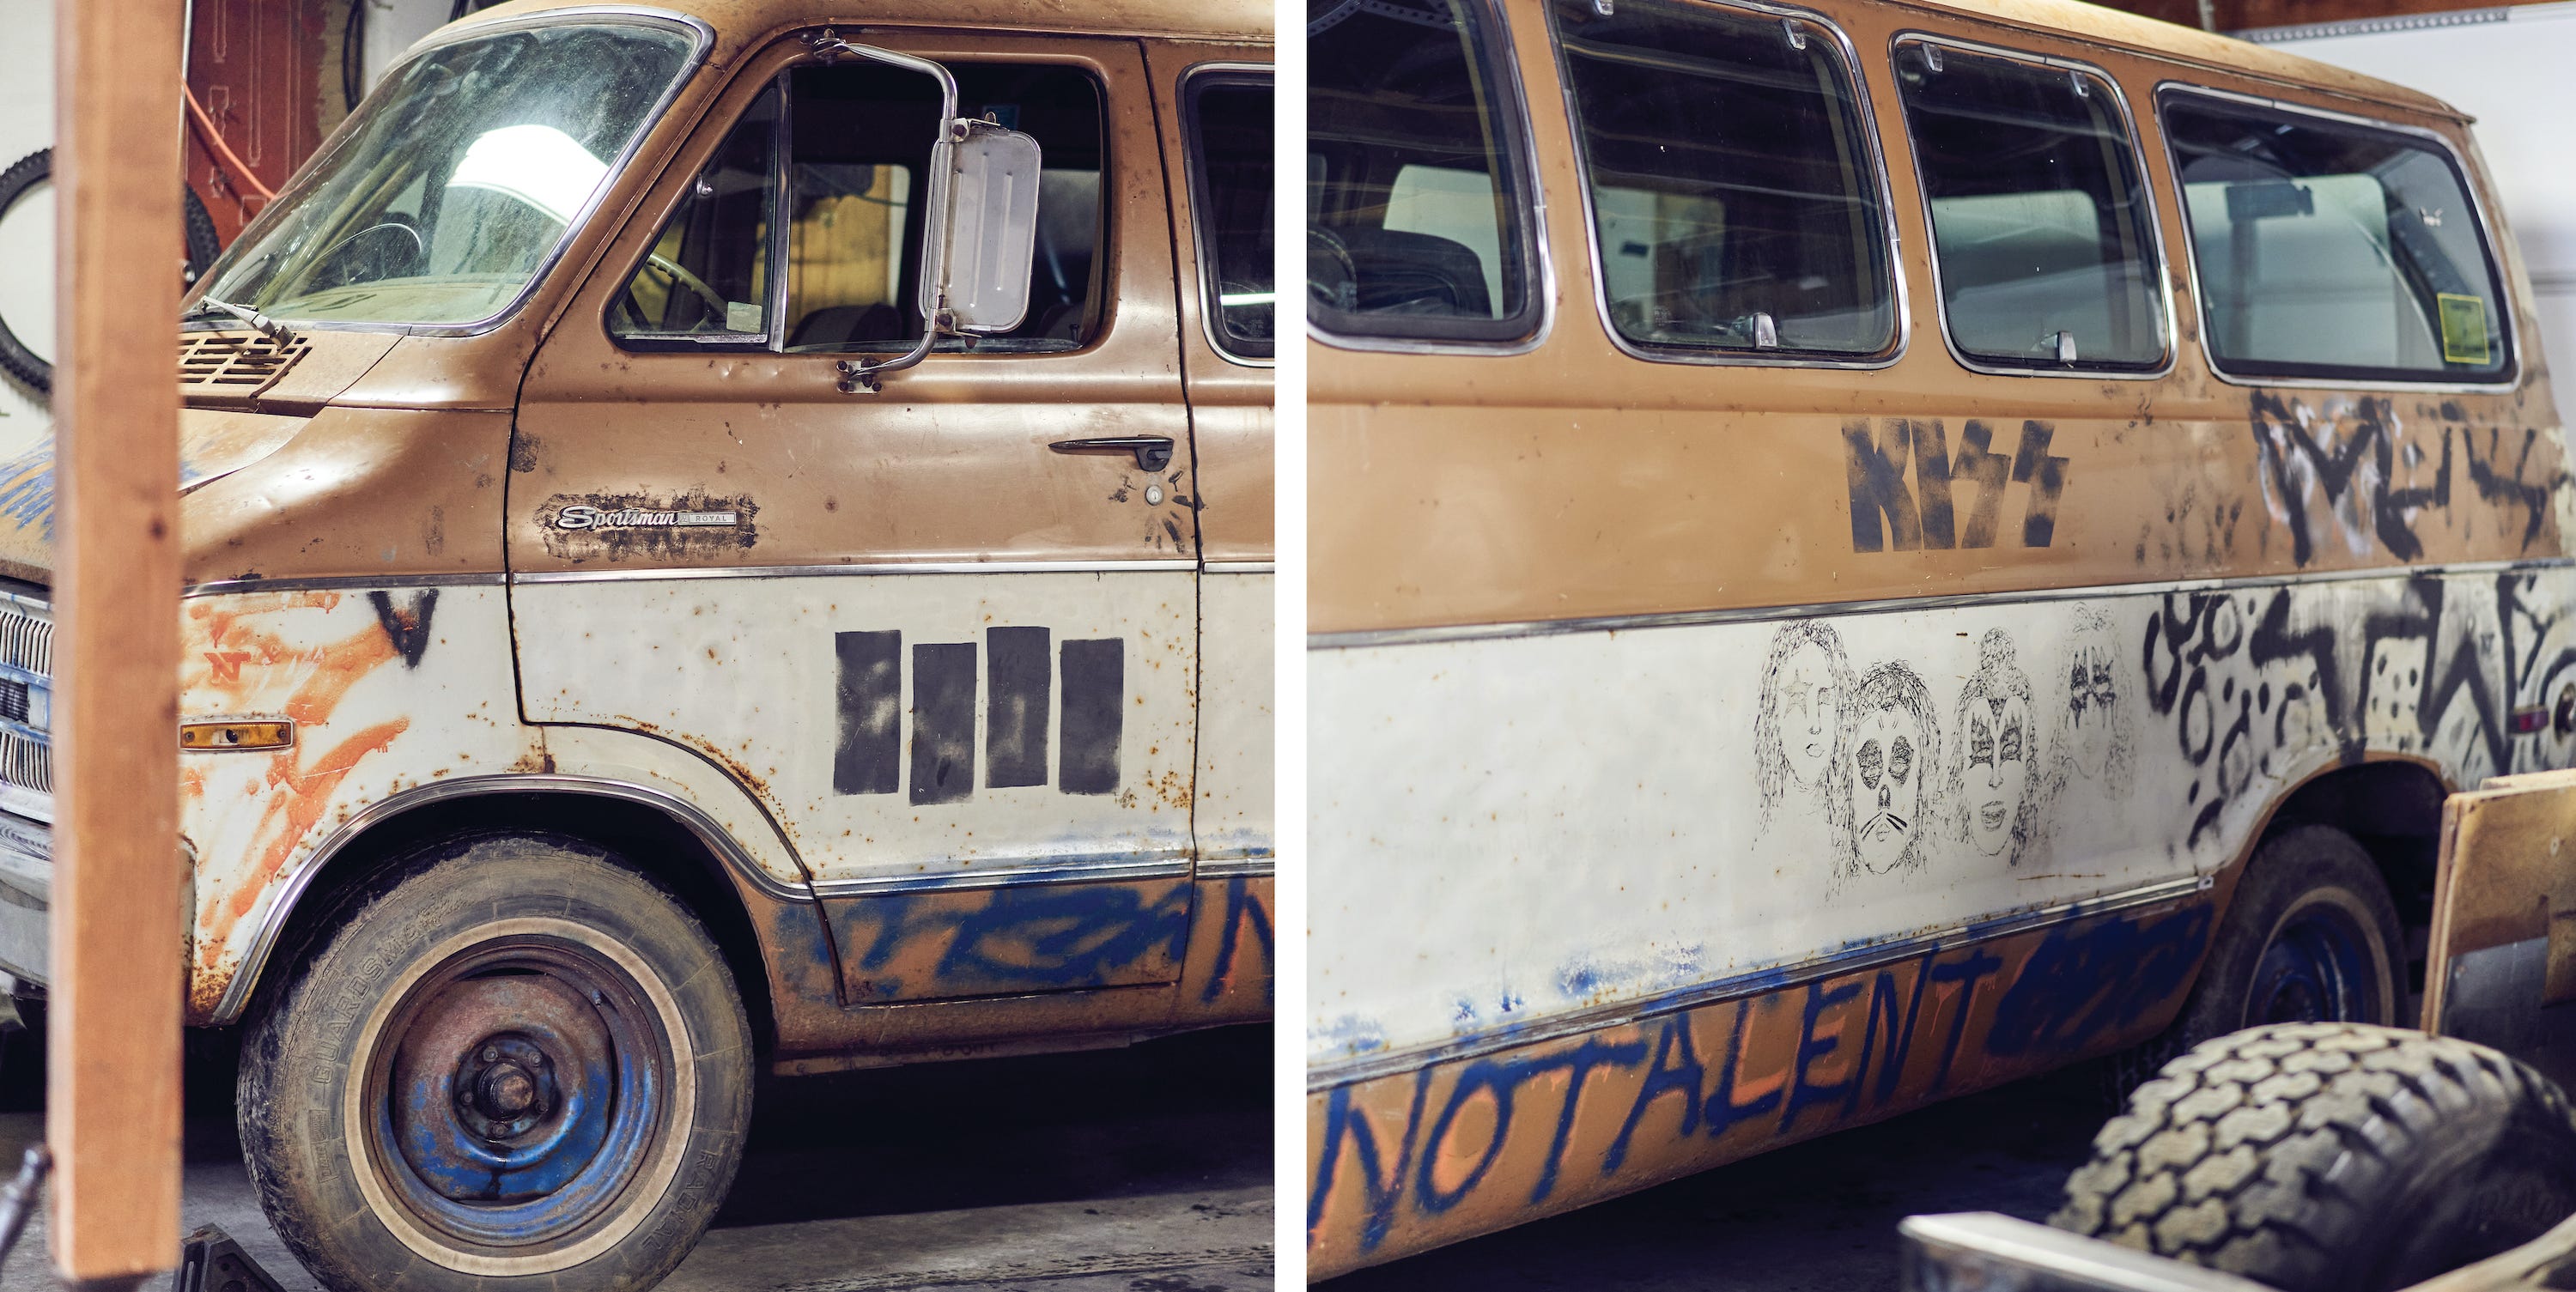 The Kurt Cobain-Decorated Melvan Is the Archetypal Tour Van, in All its Filthy Charm